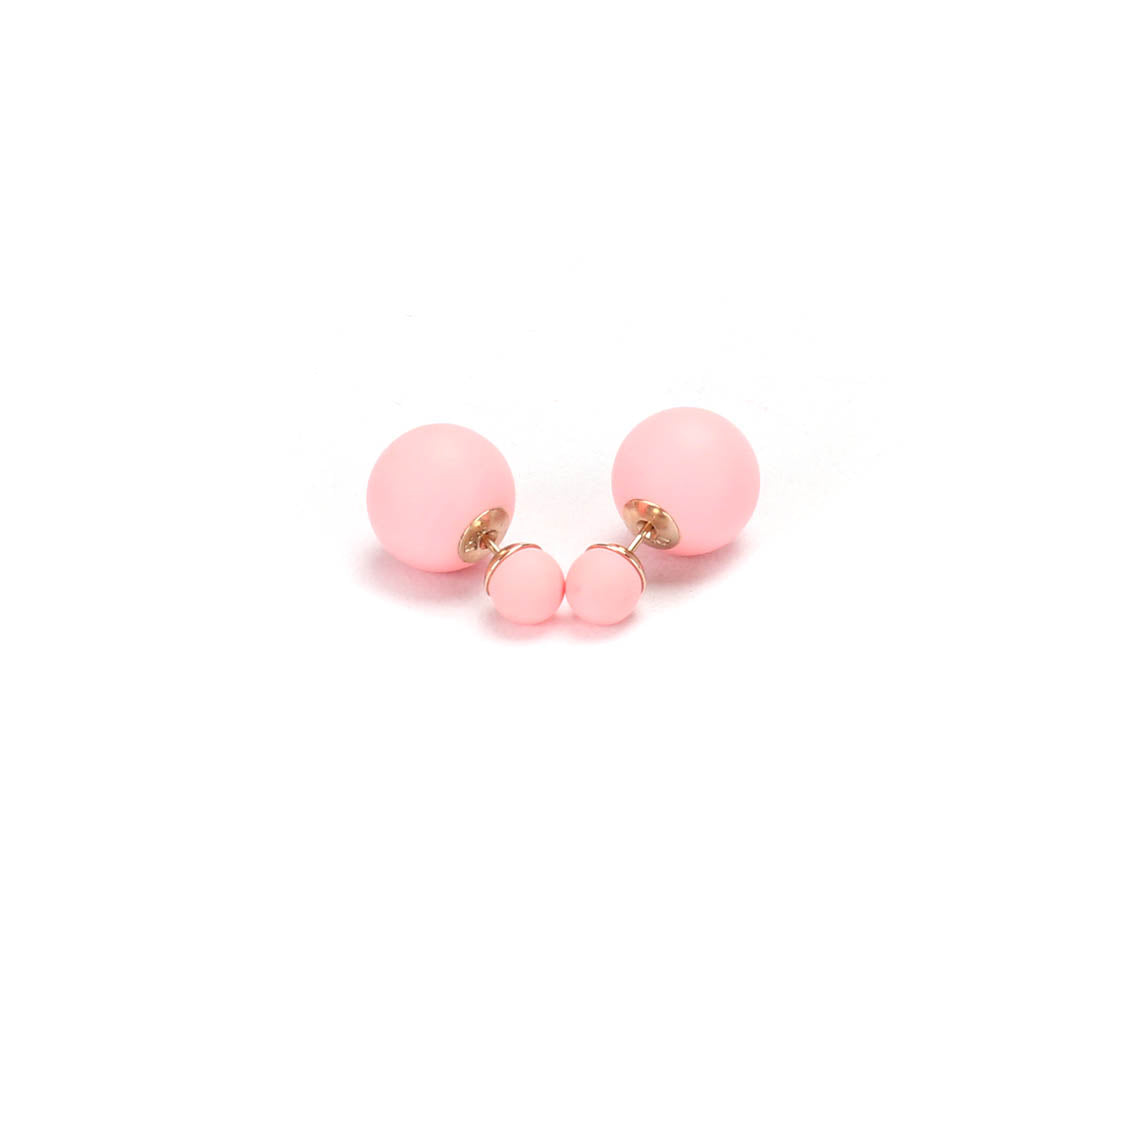 Rubber & Lacquer Tribales Stud Earrings